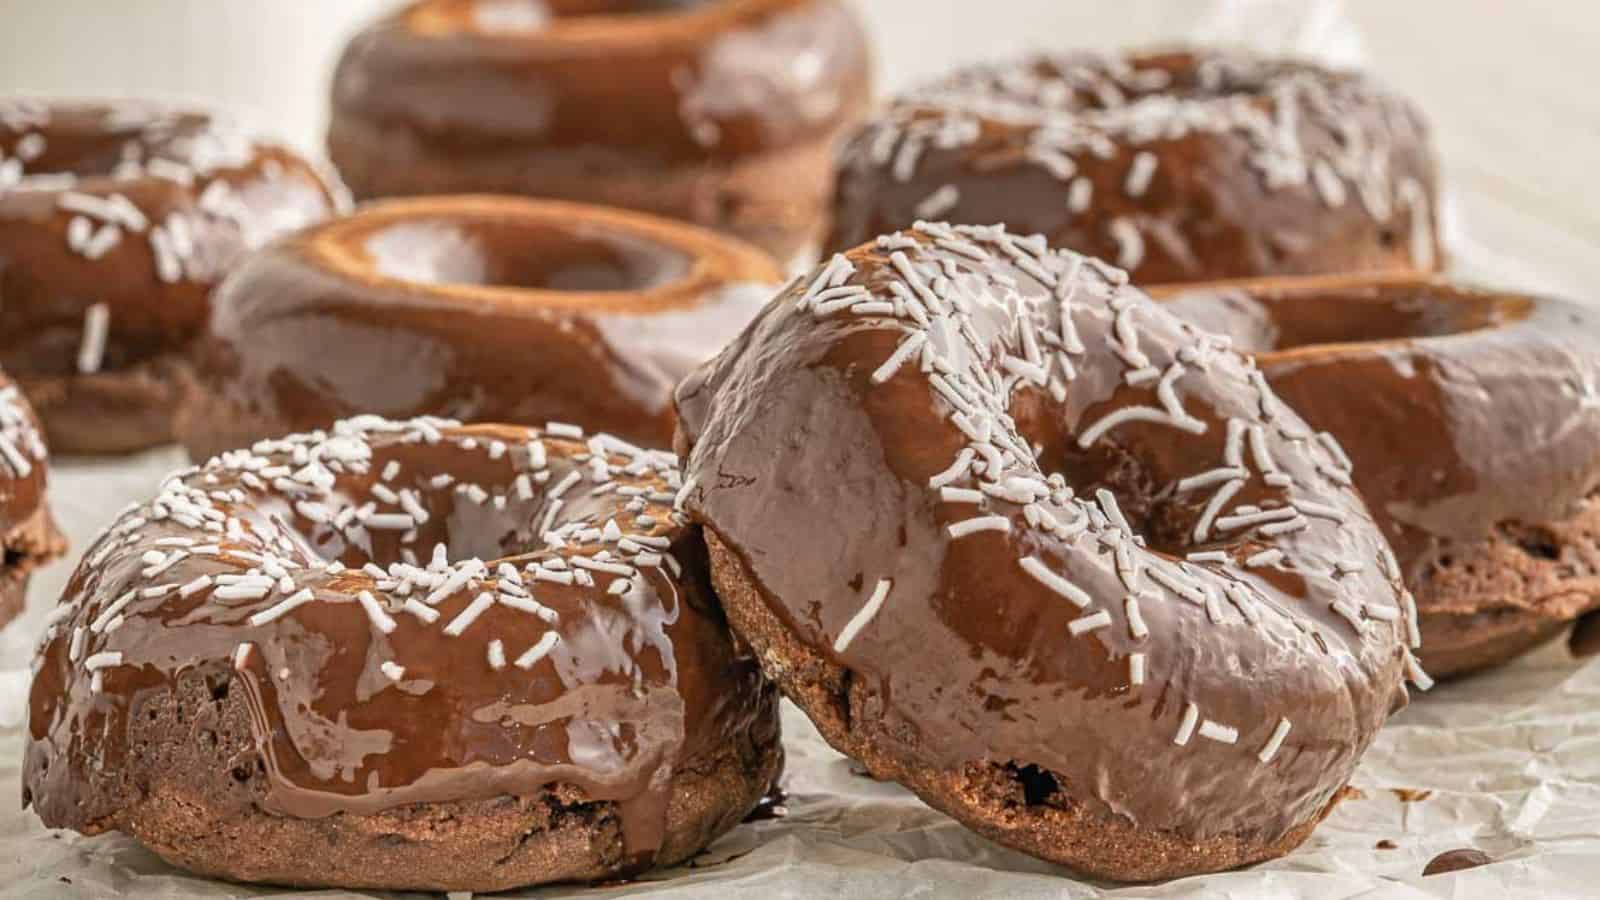 <p>Vegan and craving something sweet? Look no further than our vegan chocolate doughnuts! With their rich chocolate flavor and soft, fluffy texture, they’re a dream come true for chocolate lovers. They’re baked, not fried, so you can indulge guilt-free. You’ll wonder why you haven’t tried them sooner!<br><strong>Get the Recipe: </strong><a href="https://twocityvegans.com/vegan-chocolate-doughnuts/?utm_source=msn&utm_medium=page&utm_campaign=msn">Vegan Chocolate Doughnuts</a></p> <div class="remoji_bar">          <div class="remoji_error_bar">   Error happened.   </div>  </div> <p>The post <a href="https://fooddrinklife.com/slap-your-face-for-not-trying/">Sweet dreams are made of these 25 dessert recipes you'll slap your face for not trying</a> appeared first on <a href="https://fooddrinklife.com">Food Drink Life</a>.</p>